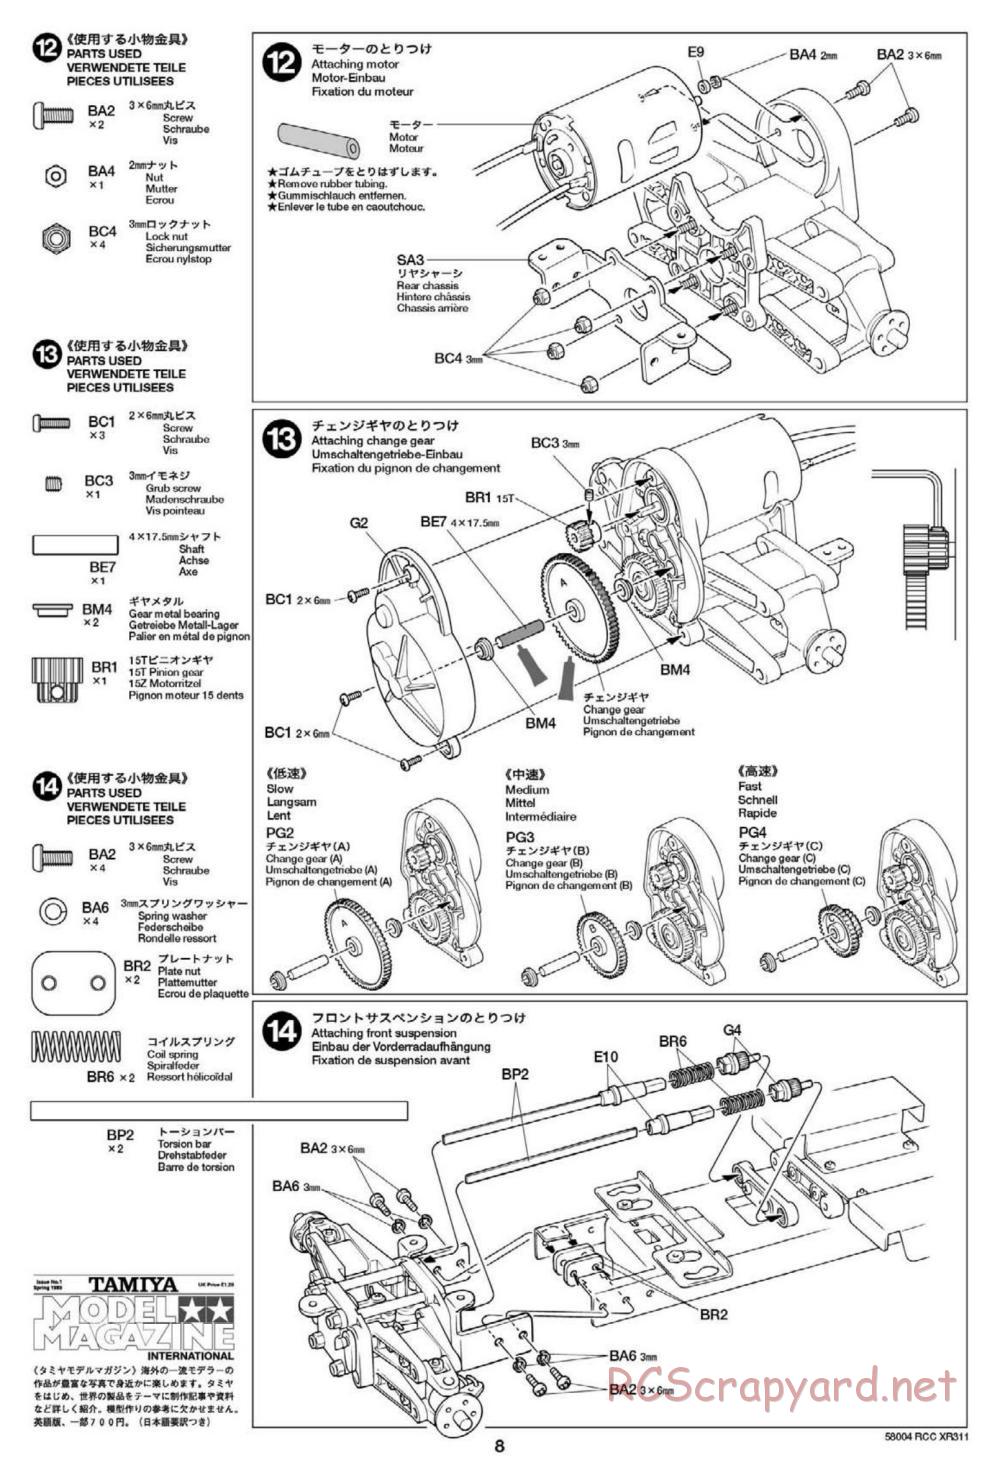 Tamiya - XR311 Combat Support Vehicle (2012) Chassis - Manual - Page 8